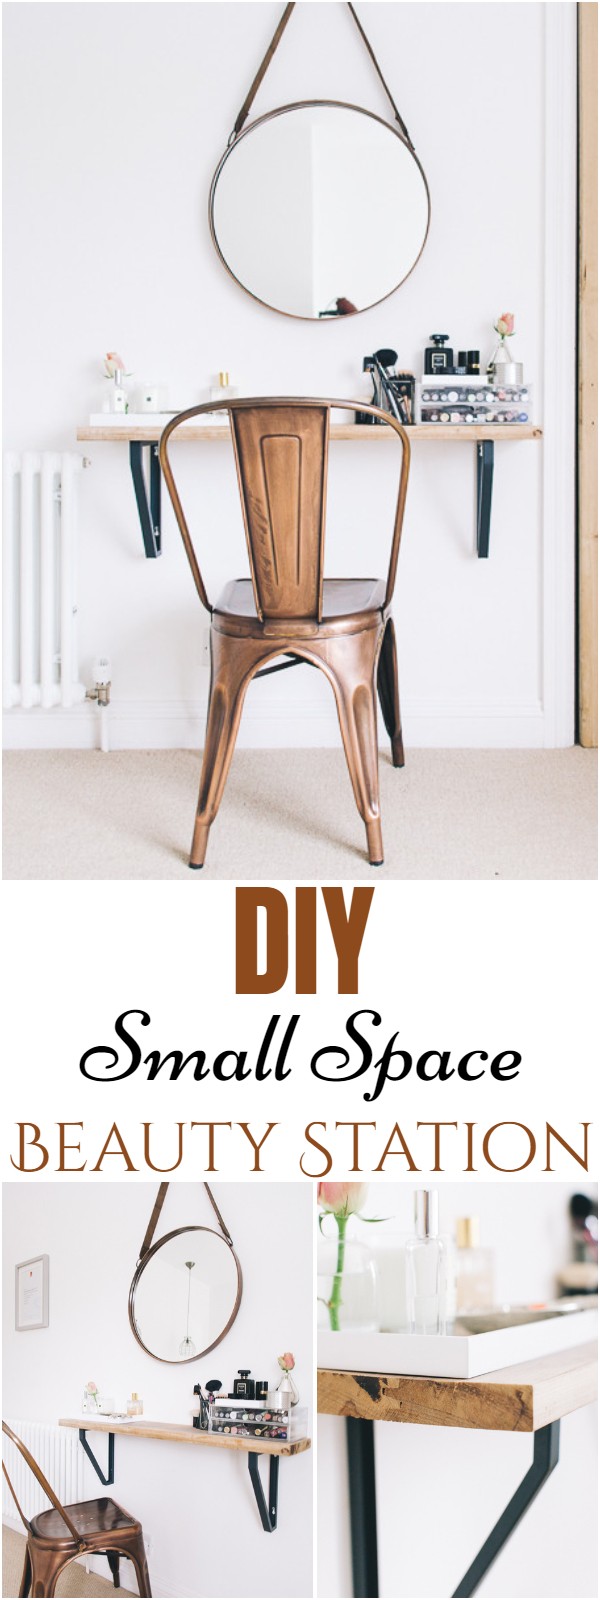 DIY Small Space Beauty Station